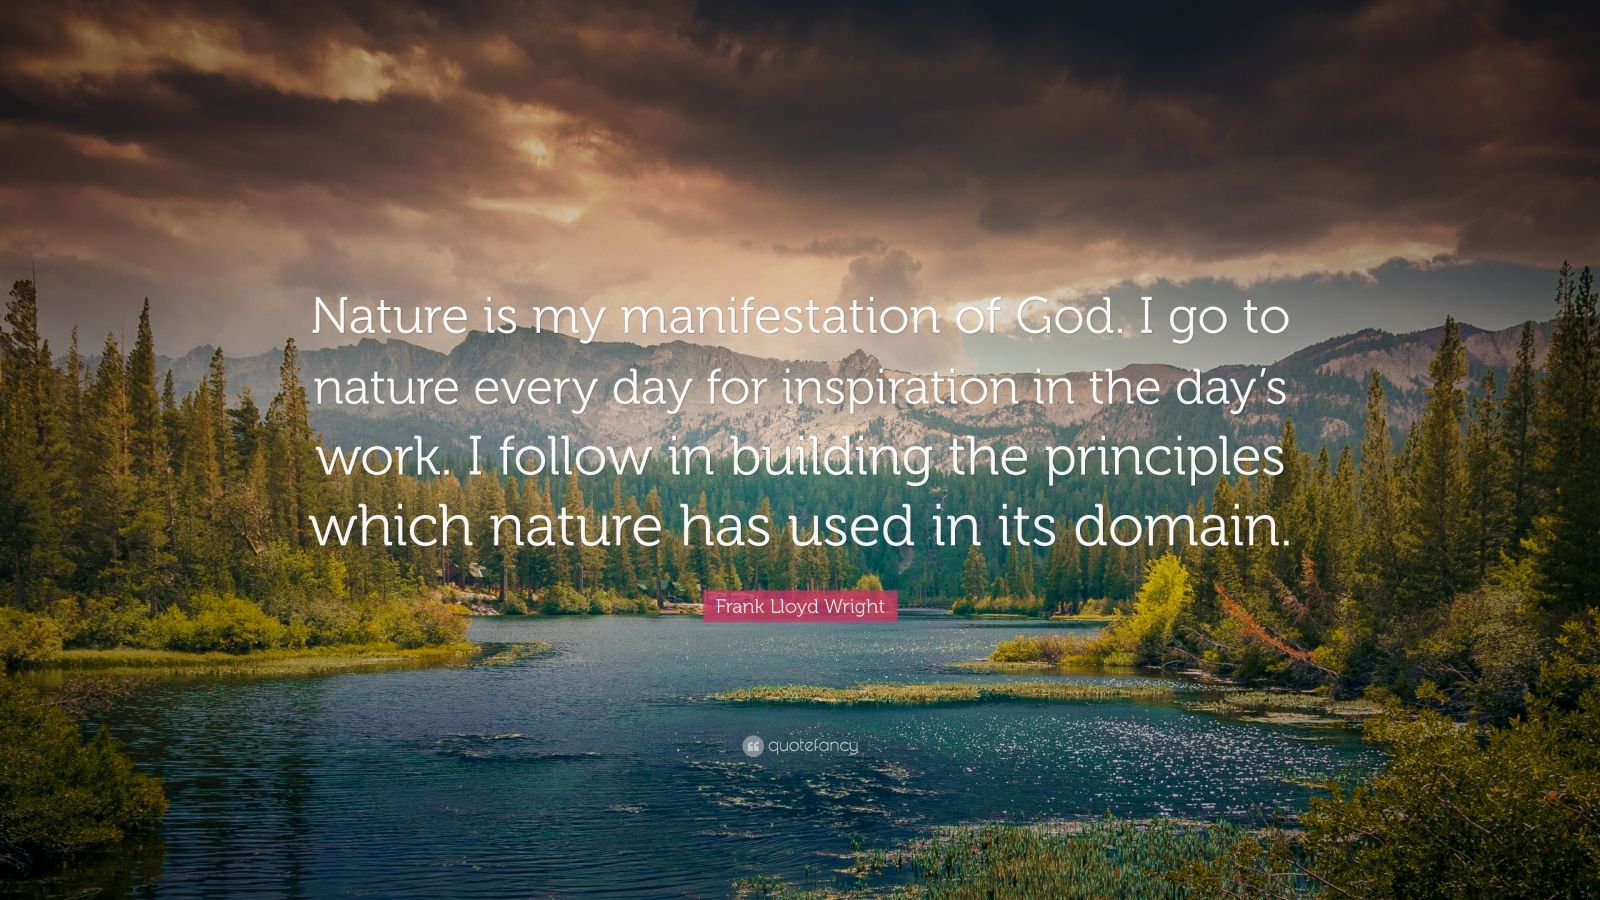 Frank Lloyd Wright Quote: “Nature is my manifestation of God. I go to